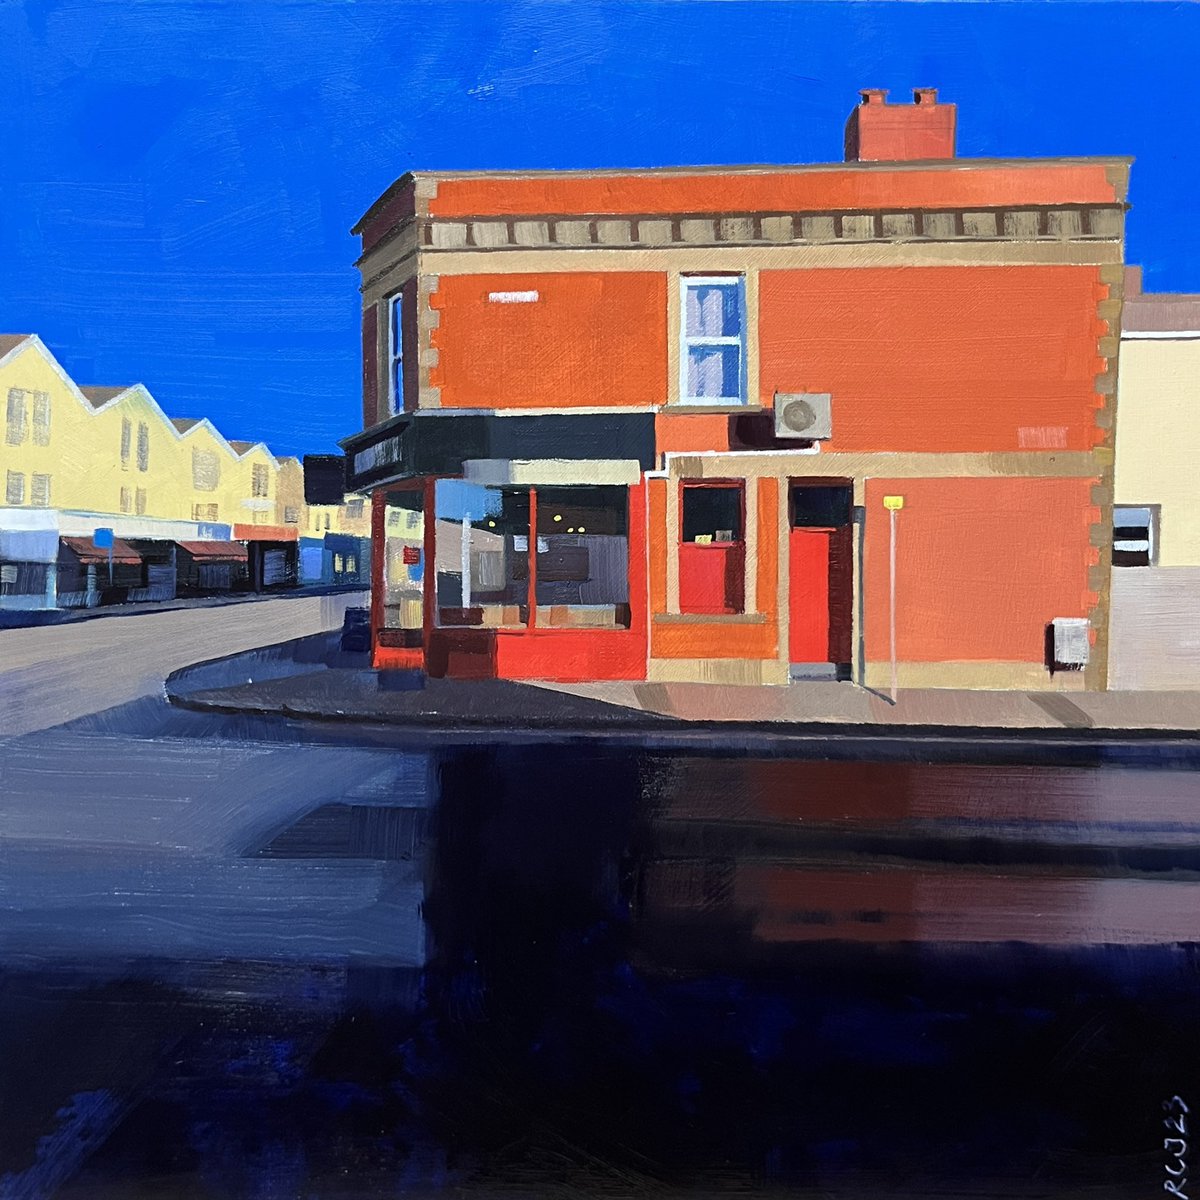 Fresh off the easel..

Corner Cafe - oils on panel, 20cmsq. 

Another little Gloucester Road streetscape, with the Deck Cafe on the corner of Merton Road, catching the last of the spring sun. 
#oilpainting #bristolart #gloucesterroad